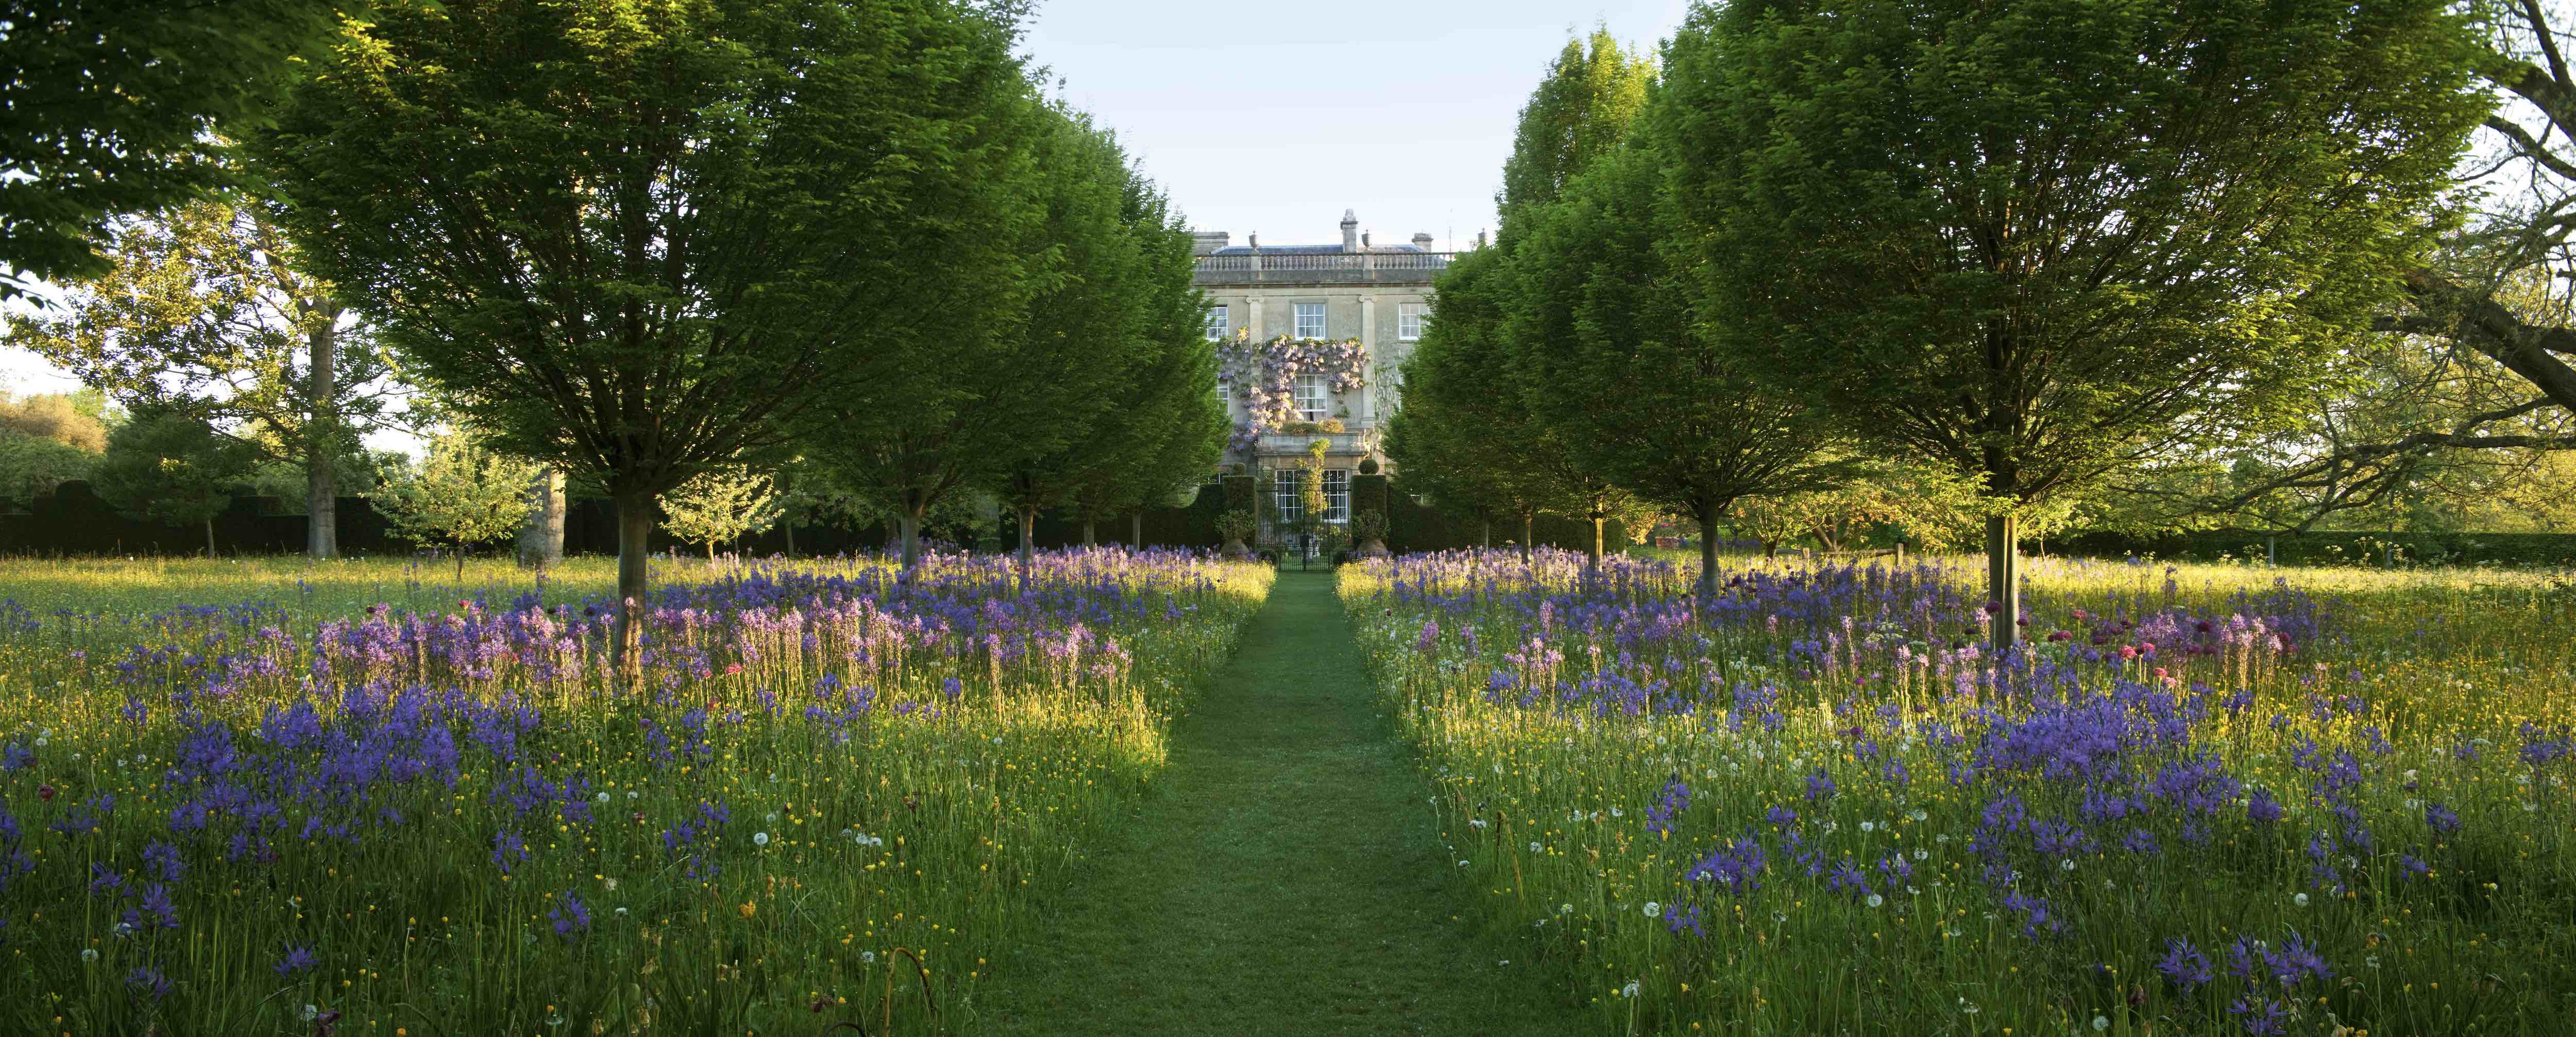 Halcyon Days & Highgrove: Cultivating the Perfect Partnership